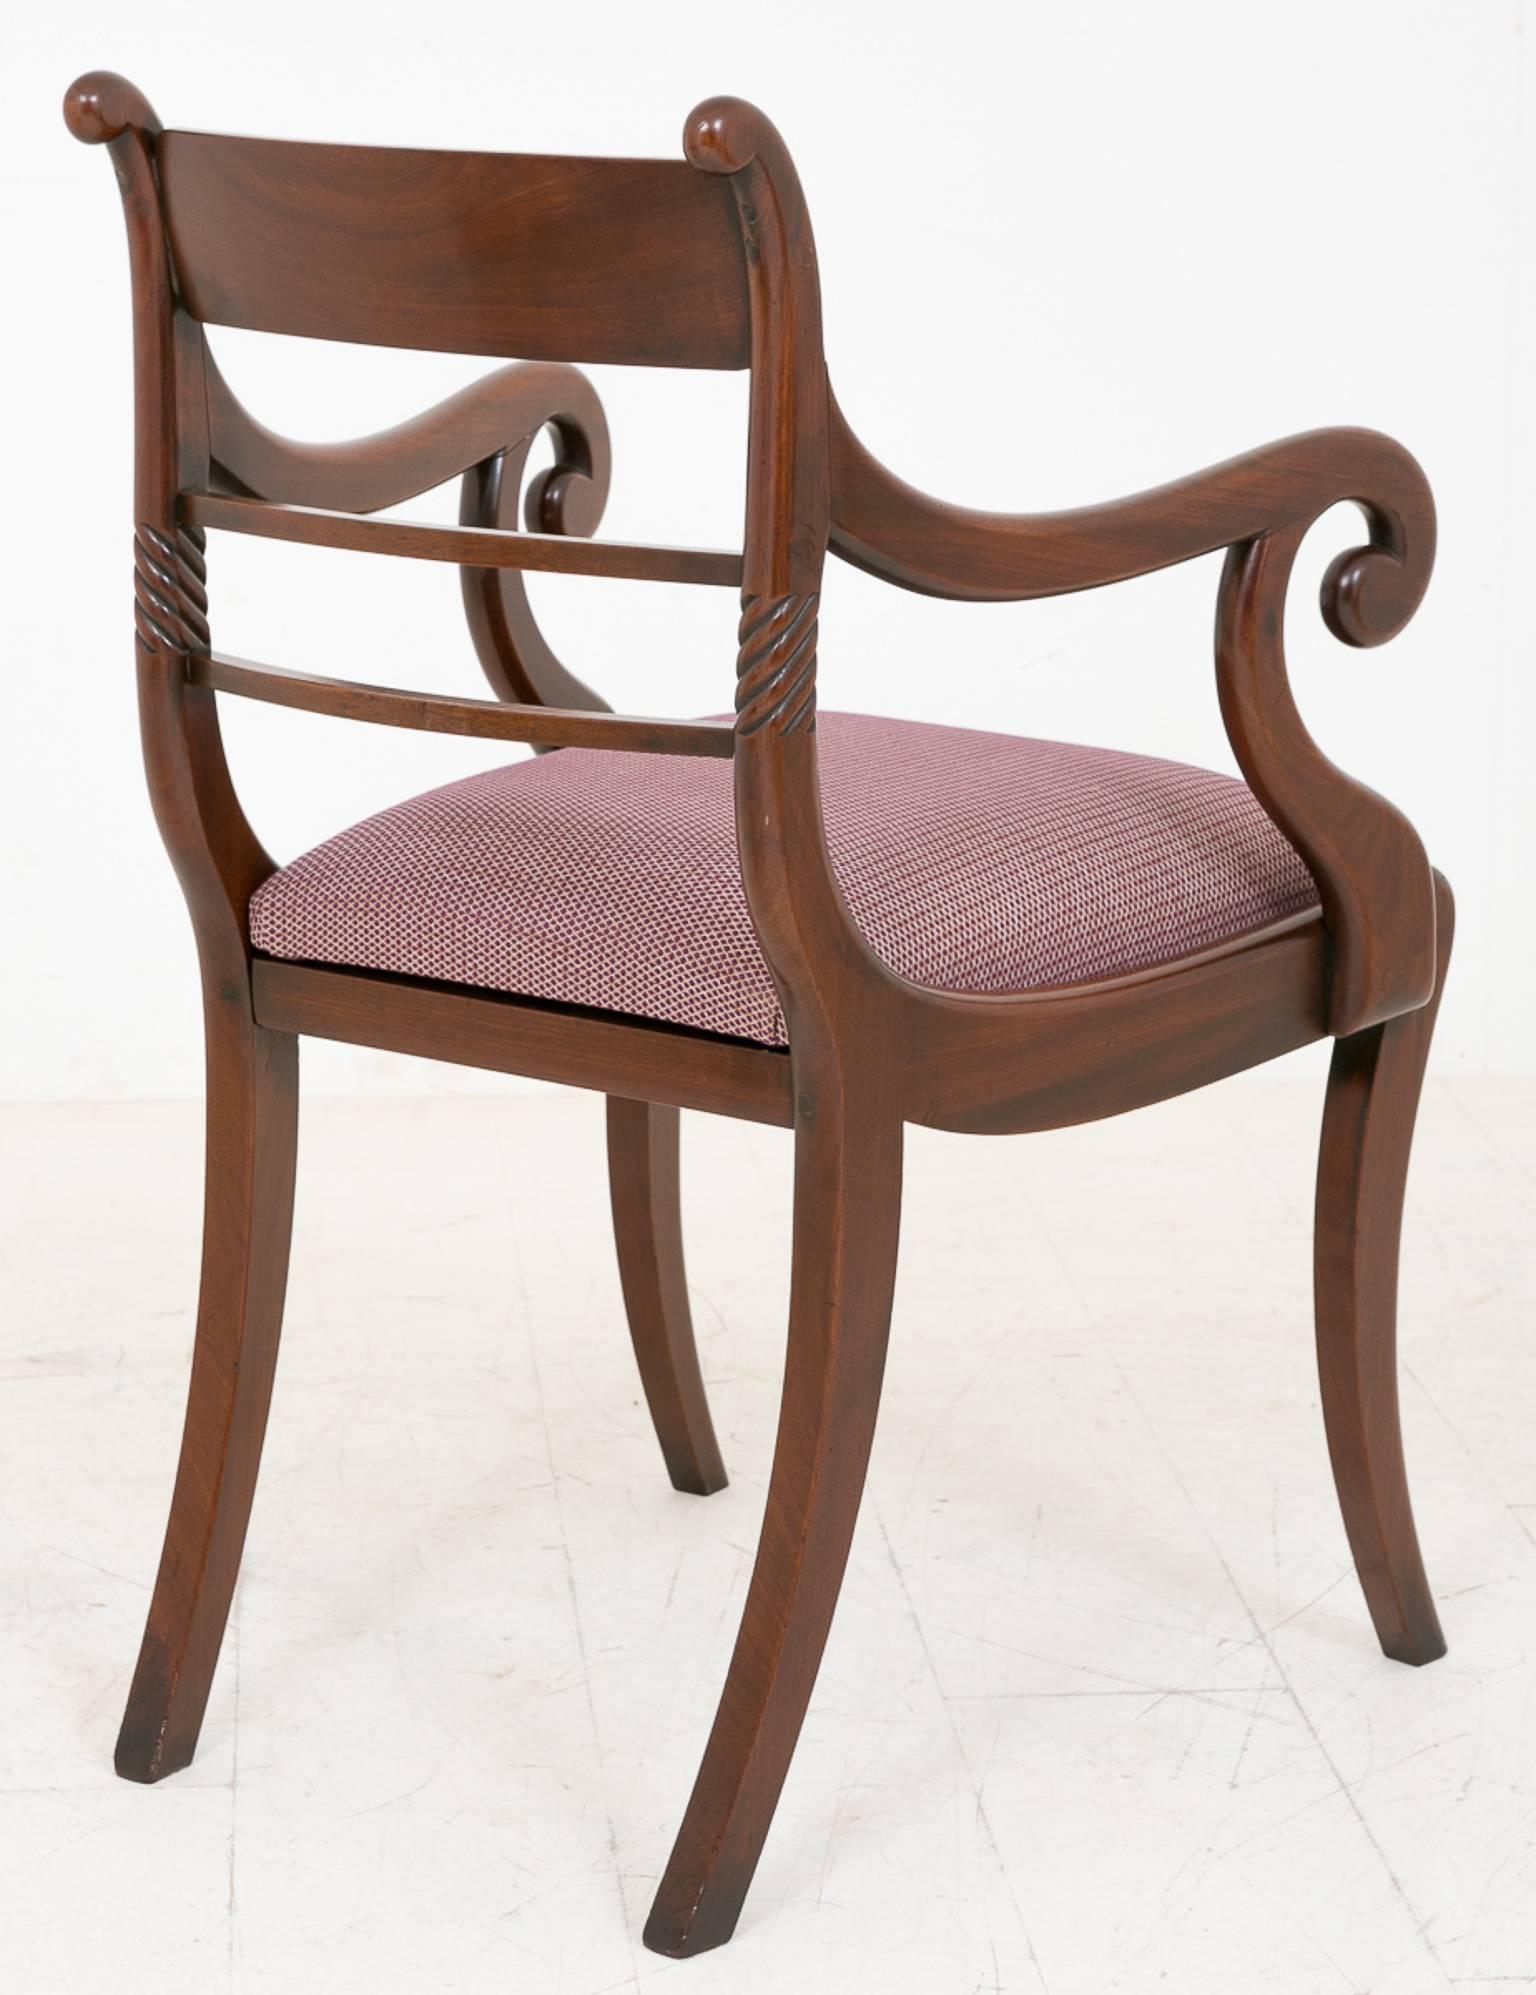 Pair of Regency mahogany library chairs.
Standing on Sabre front legs, lovely shaped arms and the upper cresting rail having a highly figured mahogany veneer.
These chairs have recently been Re upholstered.

Size:
Height 34